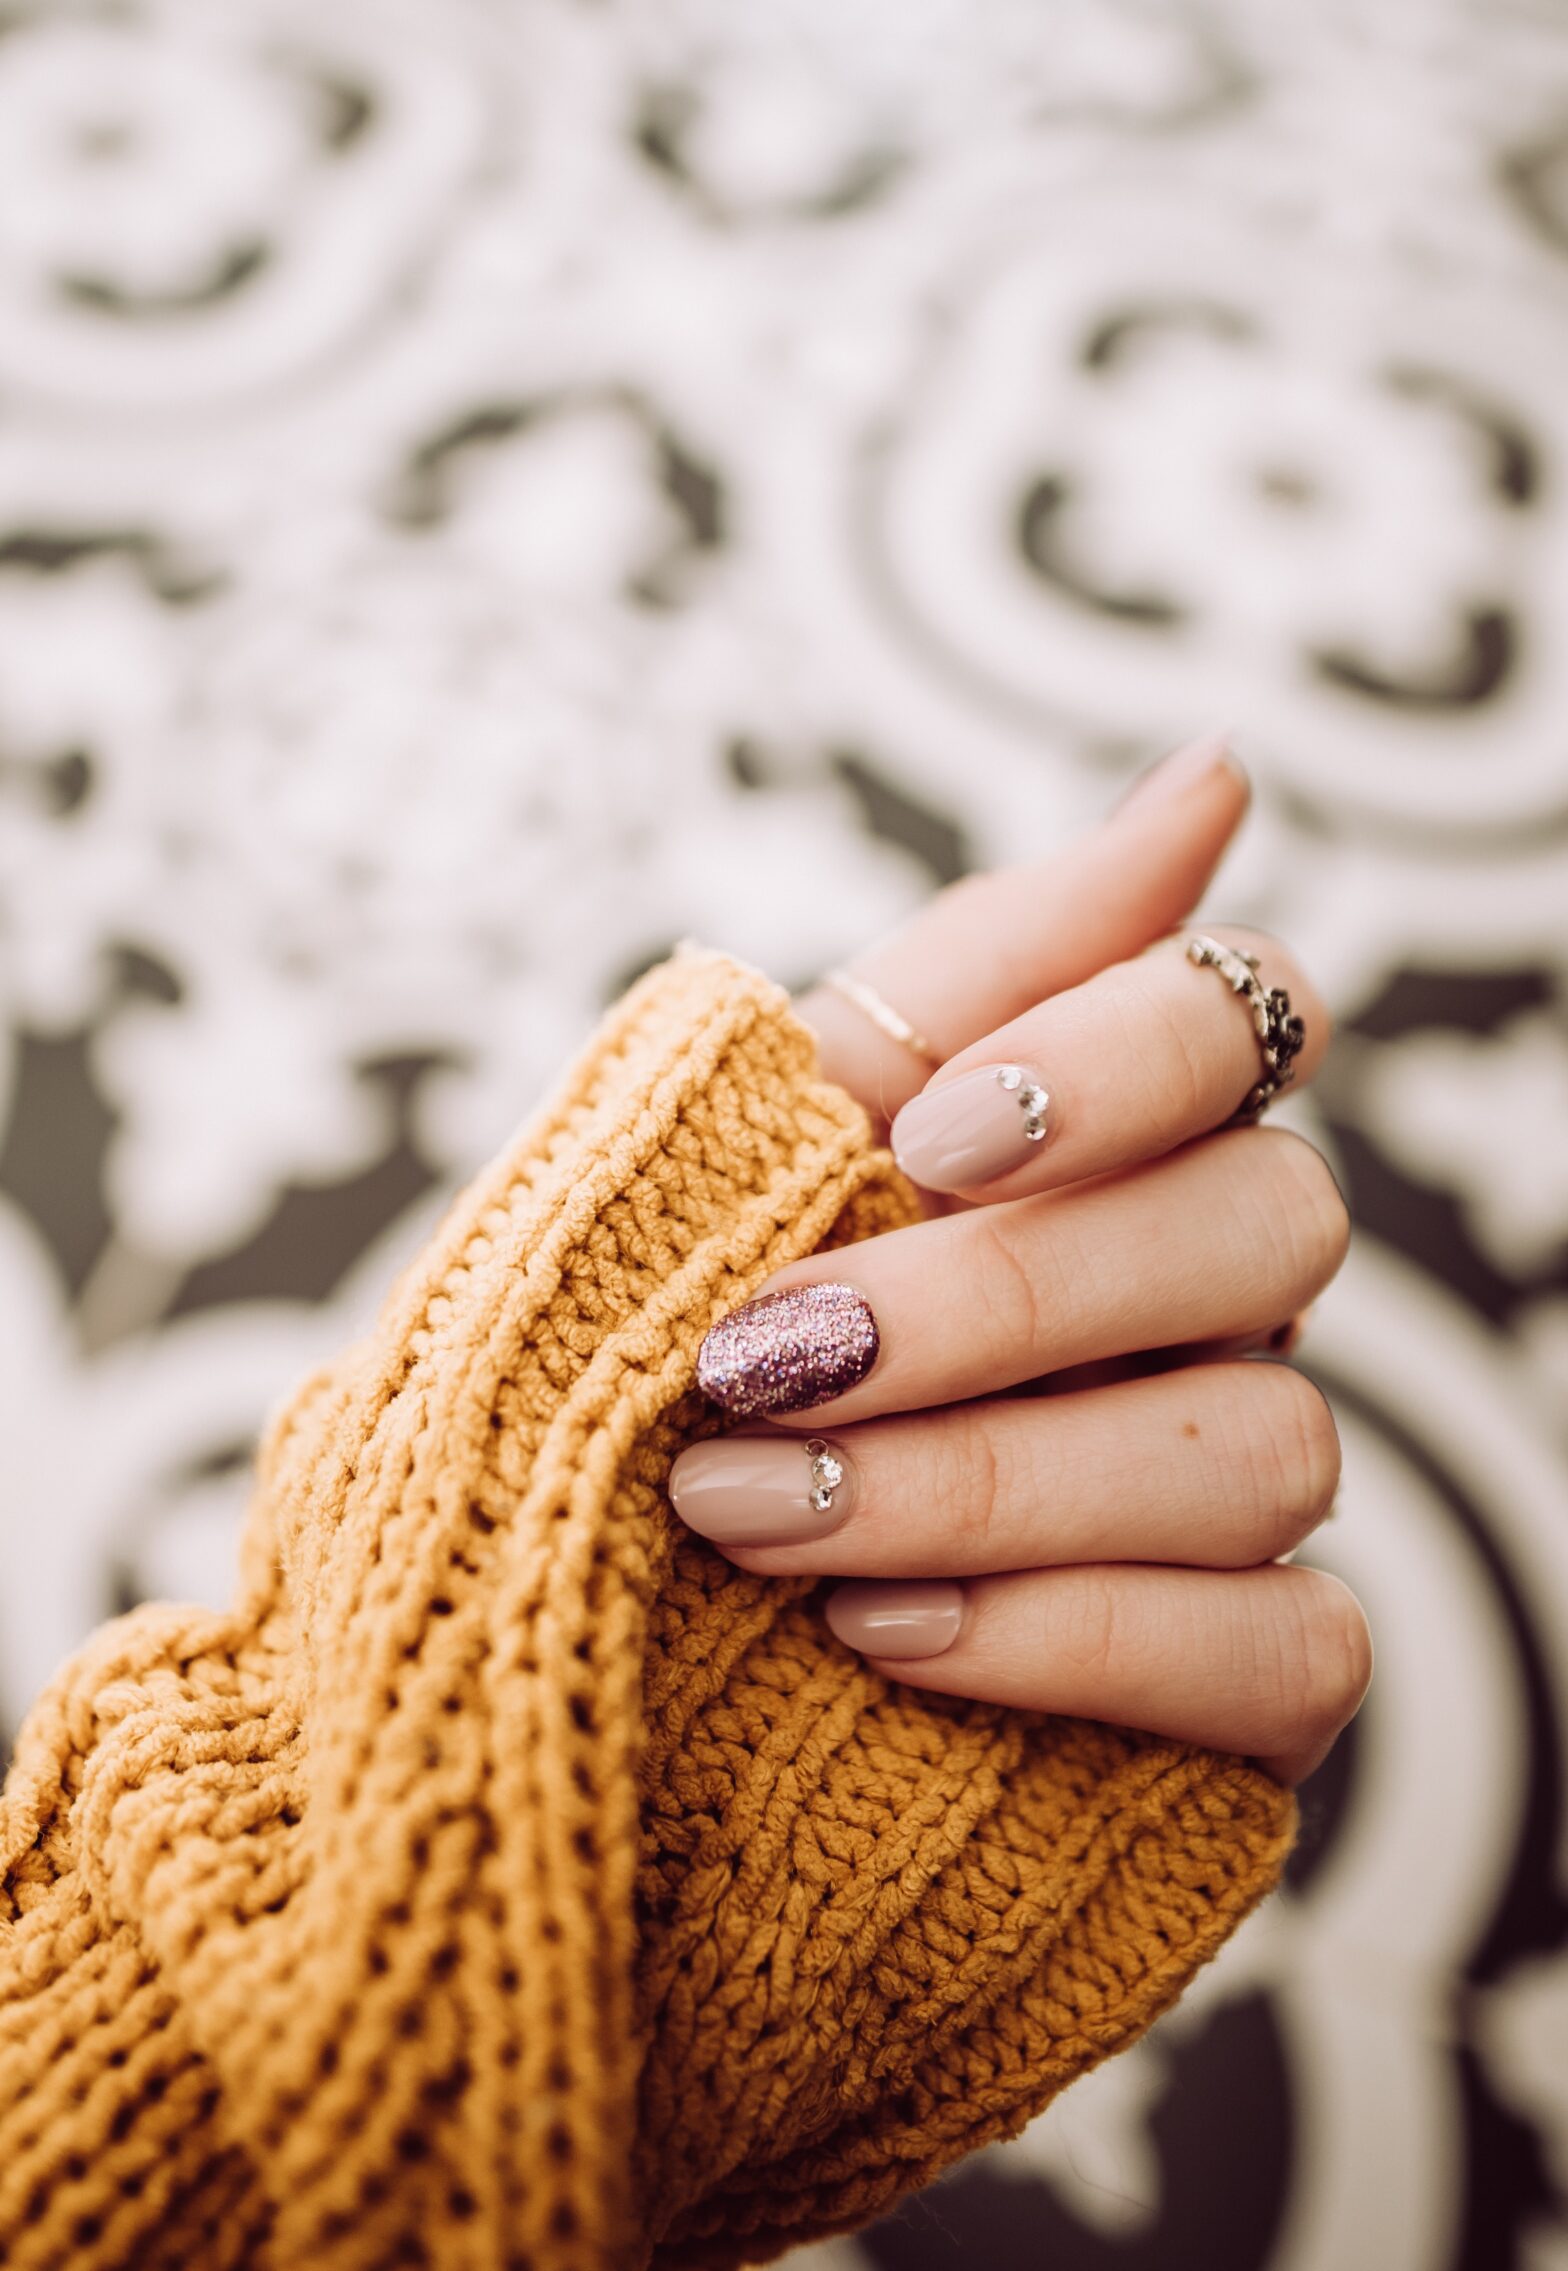 If you’re looking for nail designs with diamonds, find inspiration from this gem guide and choose from some glam, simple, and alternative looks. Pictured: nail design with diamond gems.